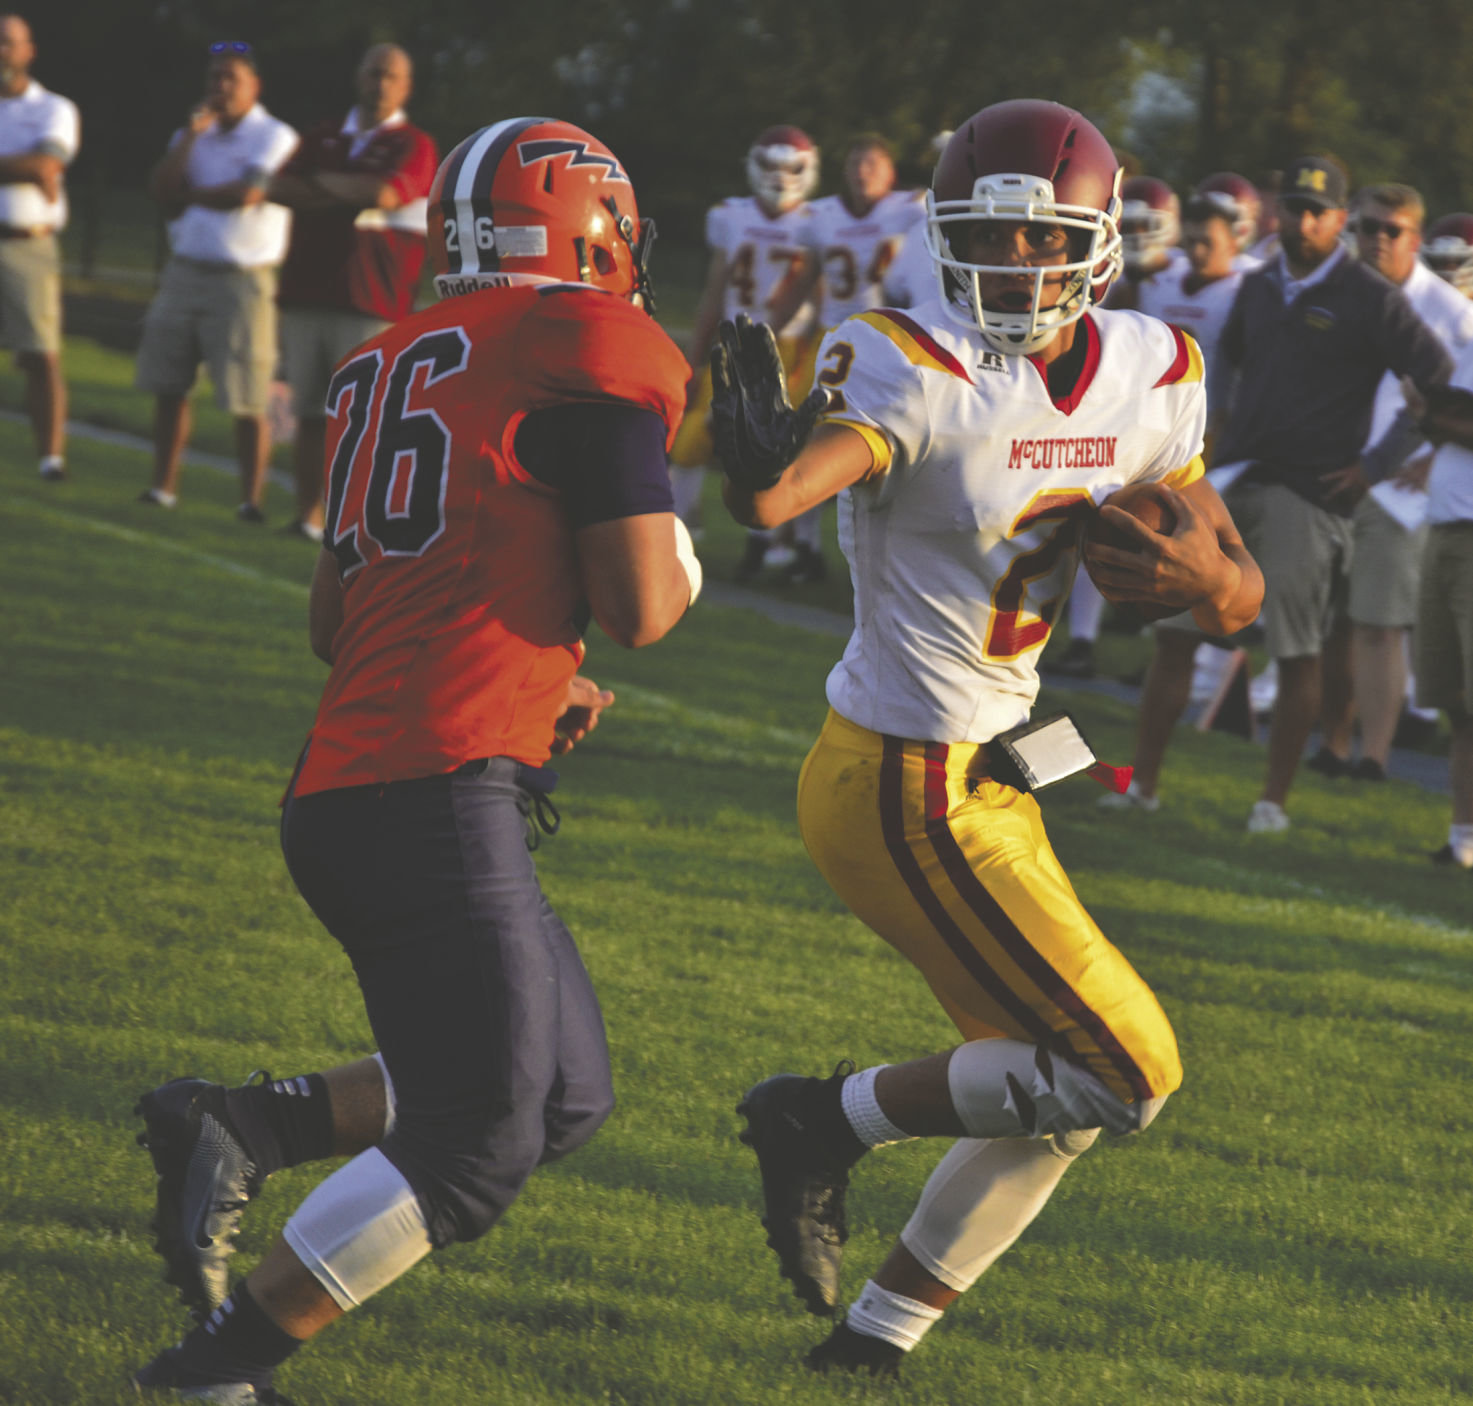 North Montgomery's Nick Norman chases McCutcheon's Mason Douglas during a controlled scrimmage on Friday night.